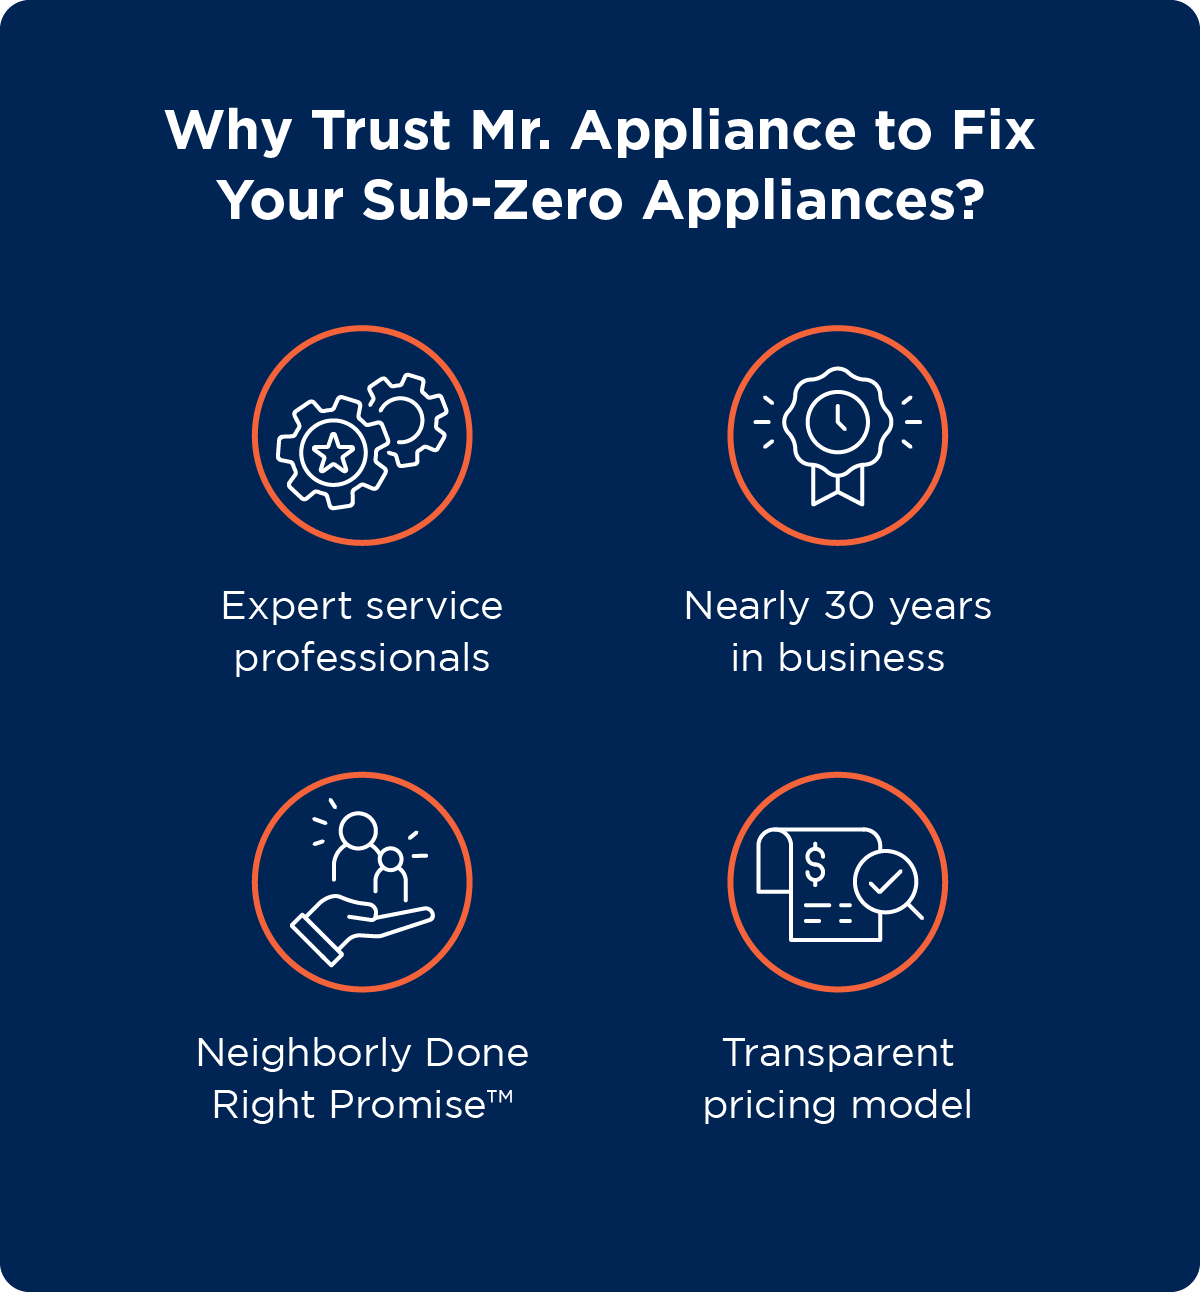 Four reasons to trust Mr. Appliance for Sub-Zero repairs, including decades of expert service and transparent pricing.